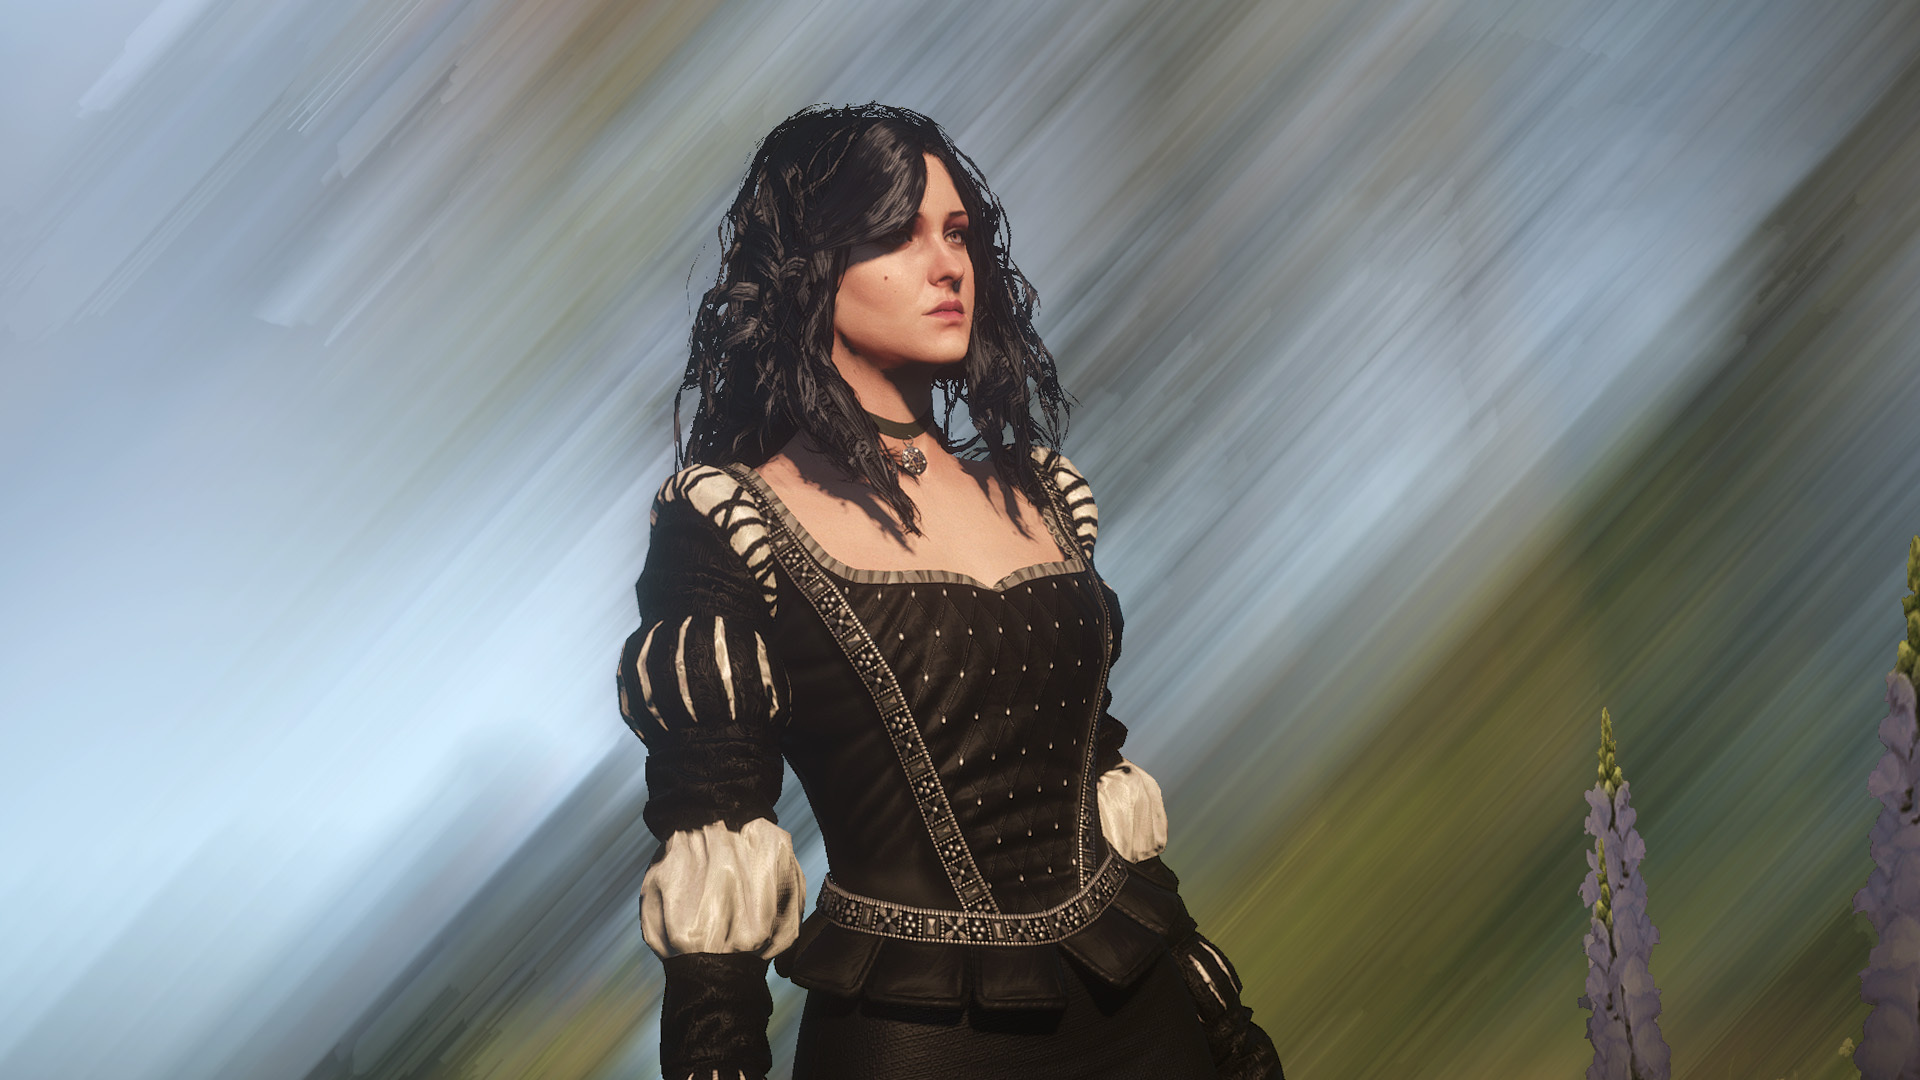 Yennefer of vengerberg the witcher 3 voiced standalone follower фото 109